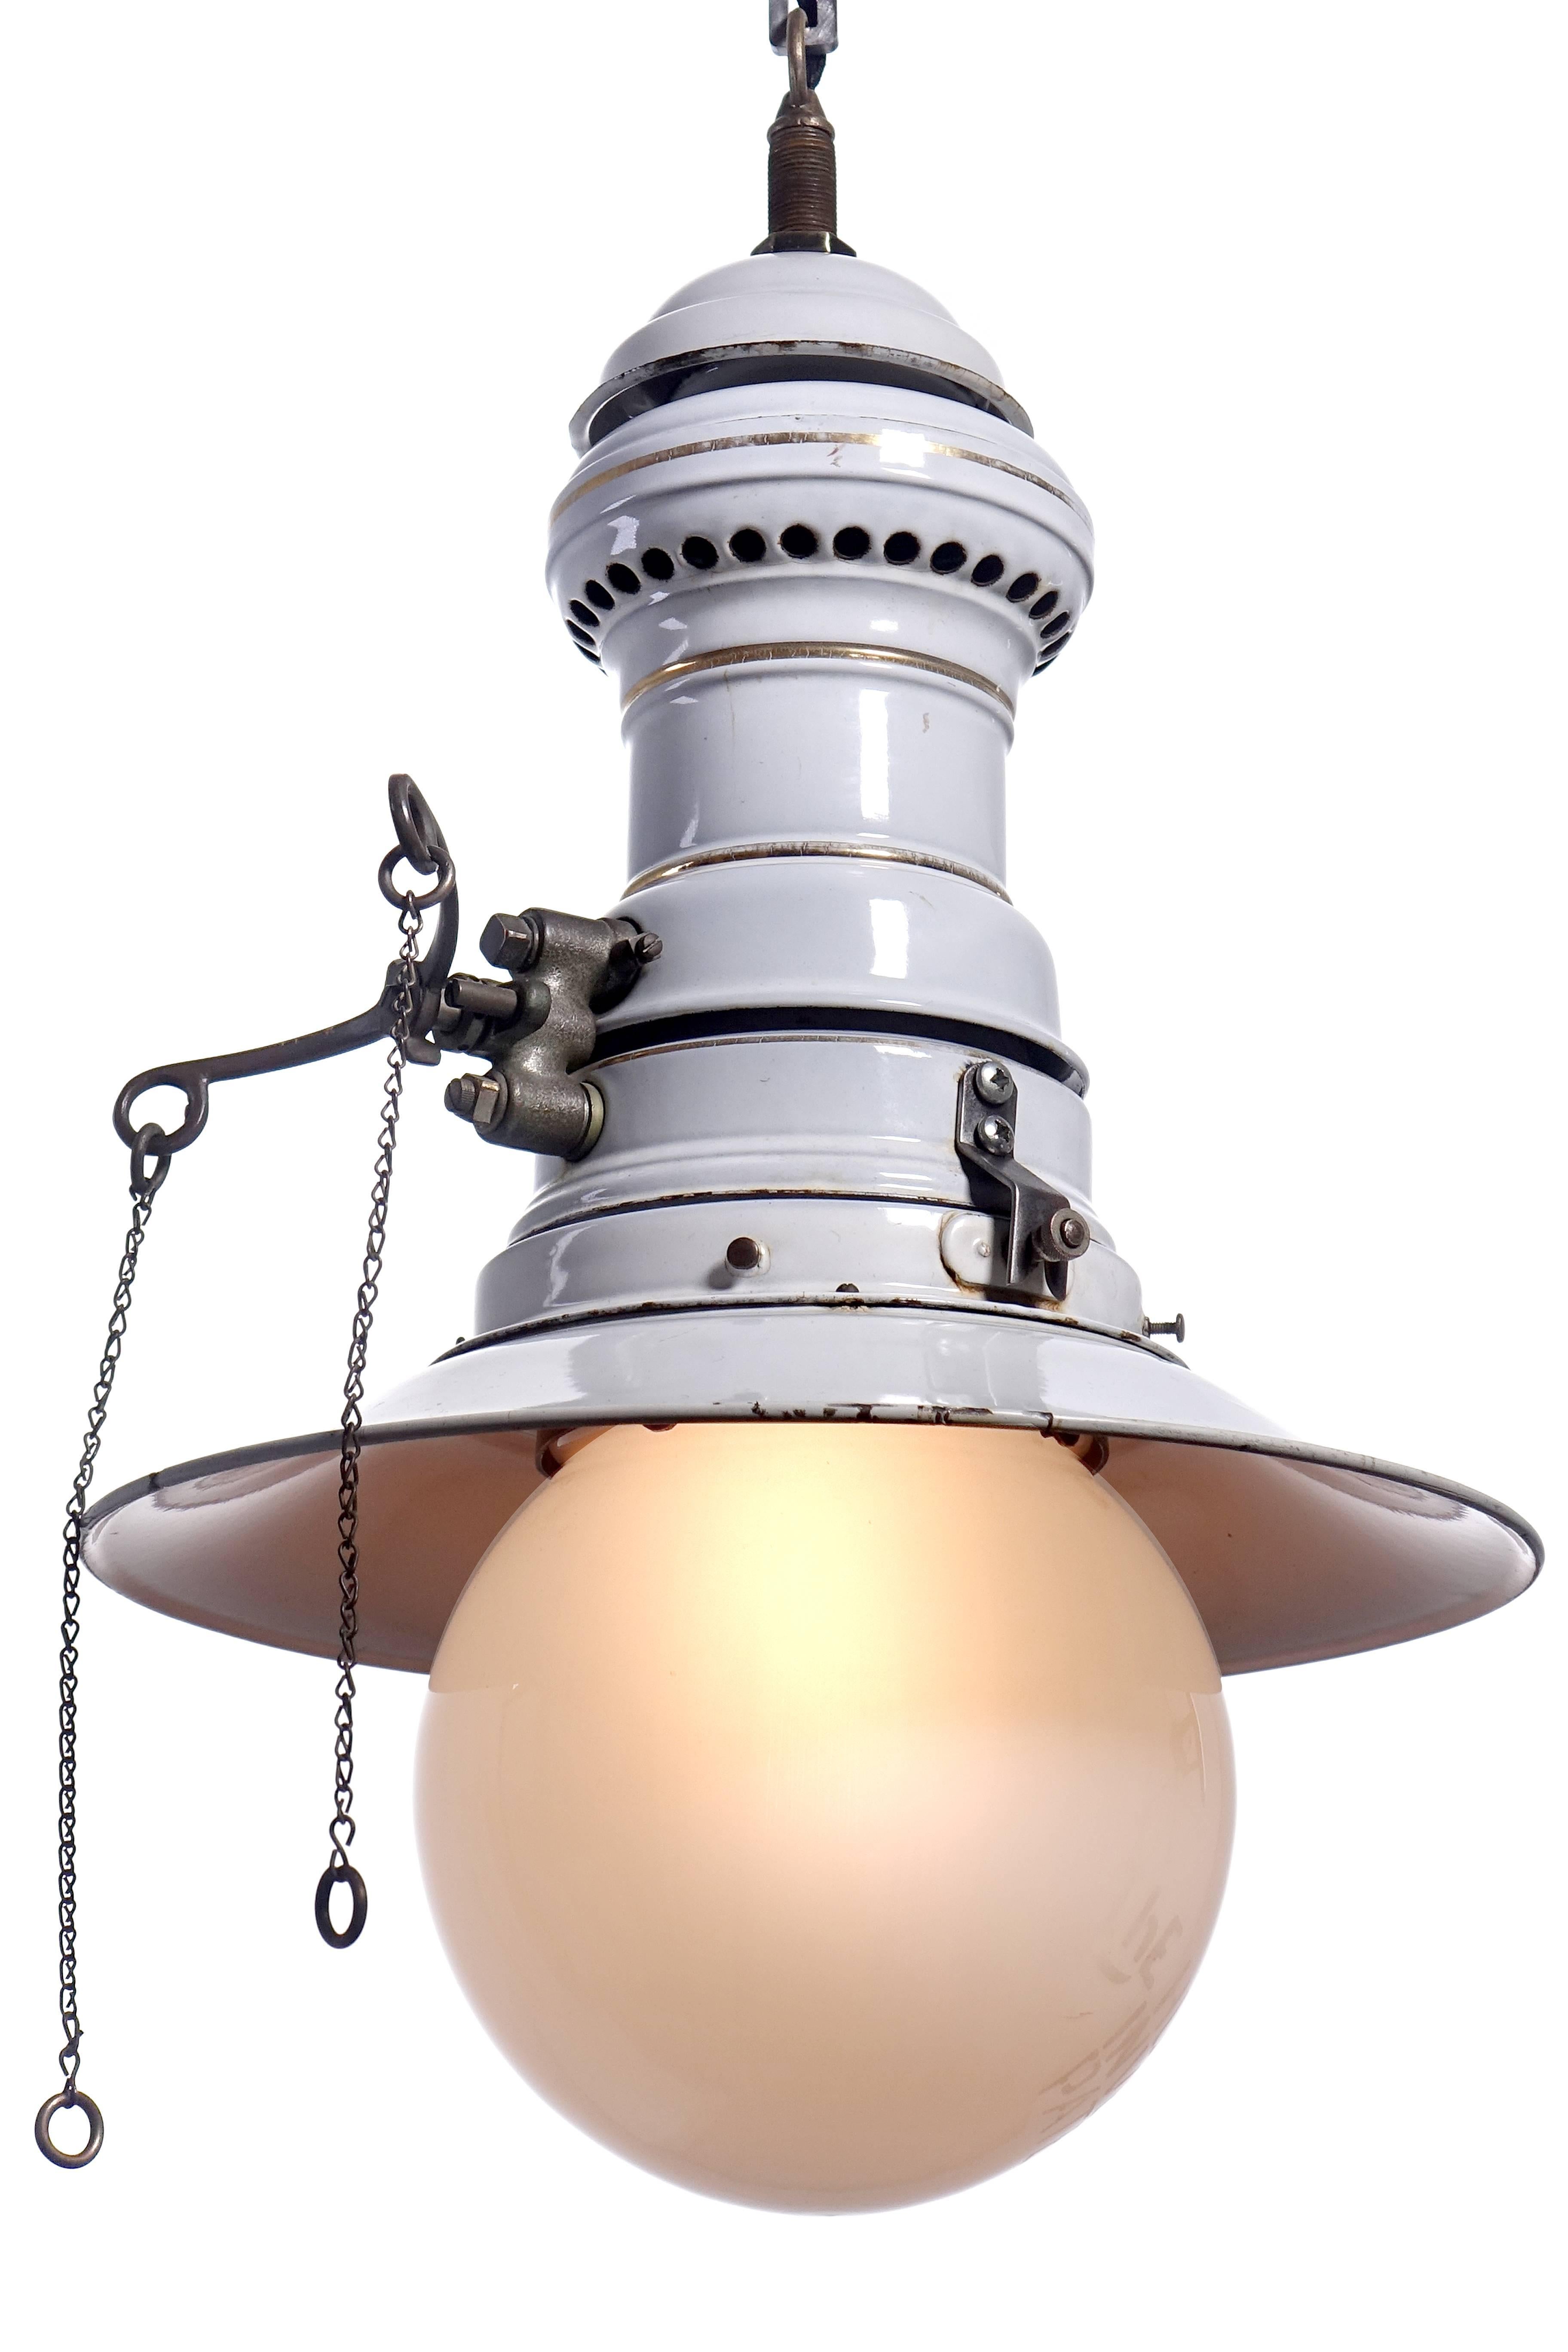 Industrial Large Early Electrified Porcelain Gas Lamp